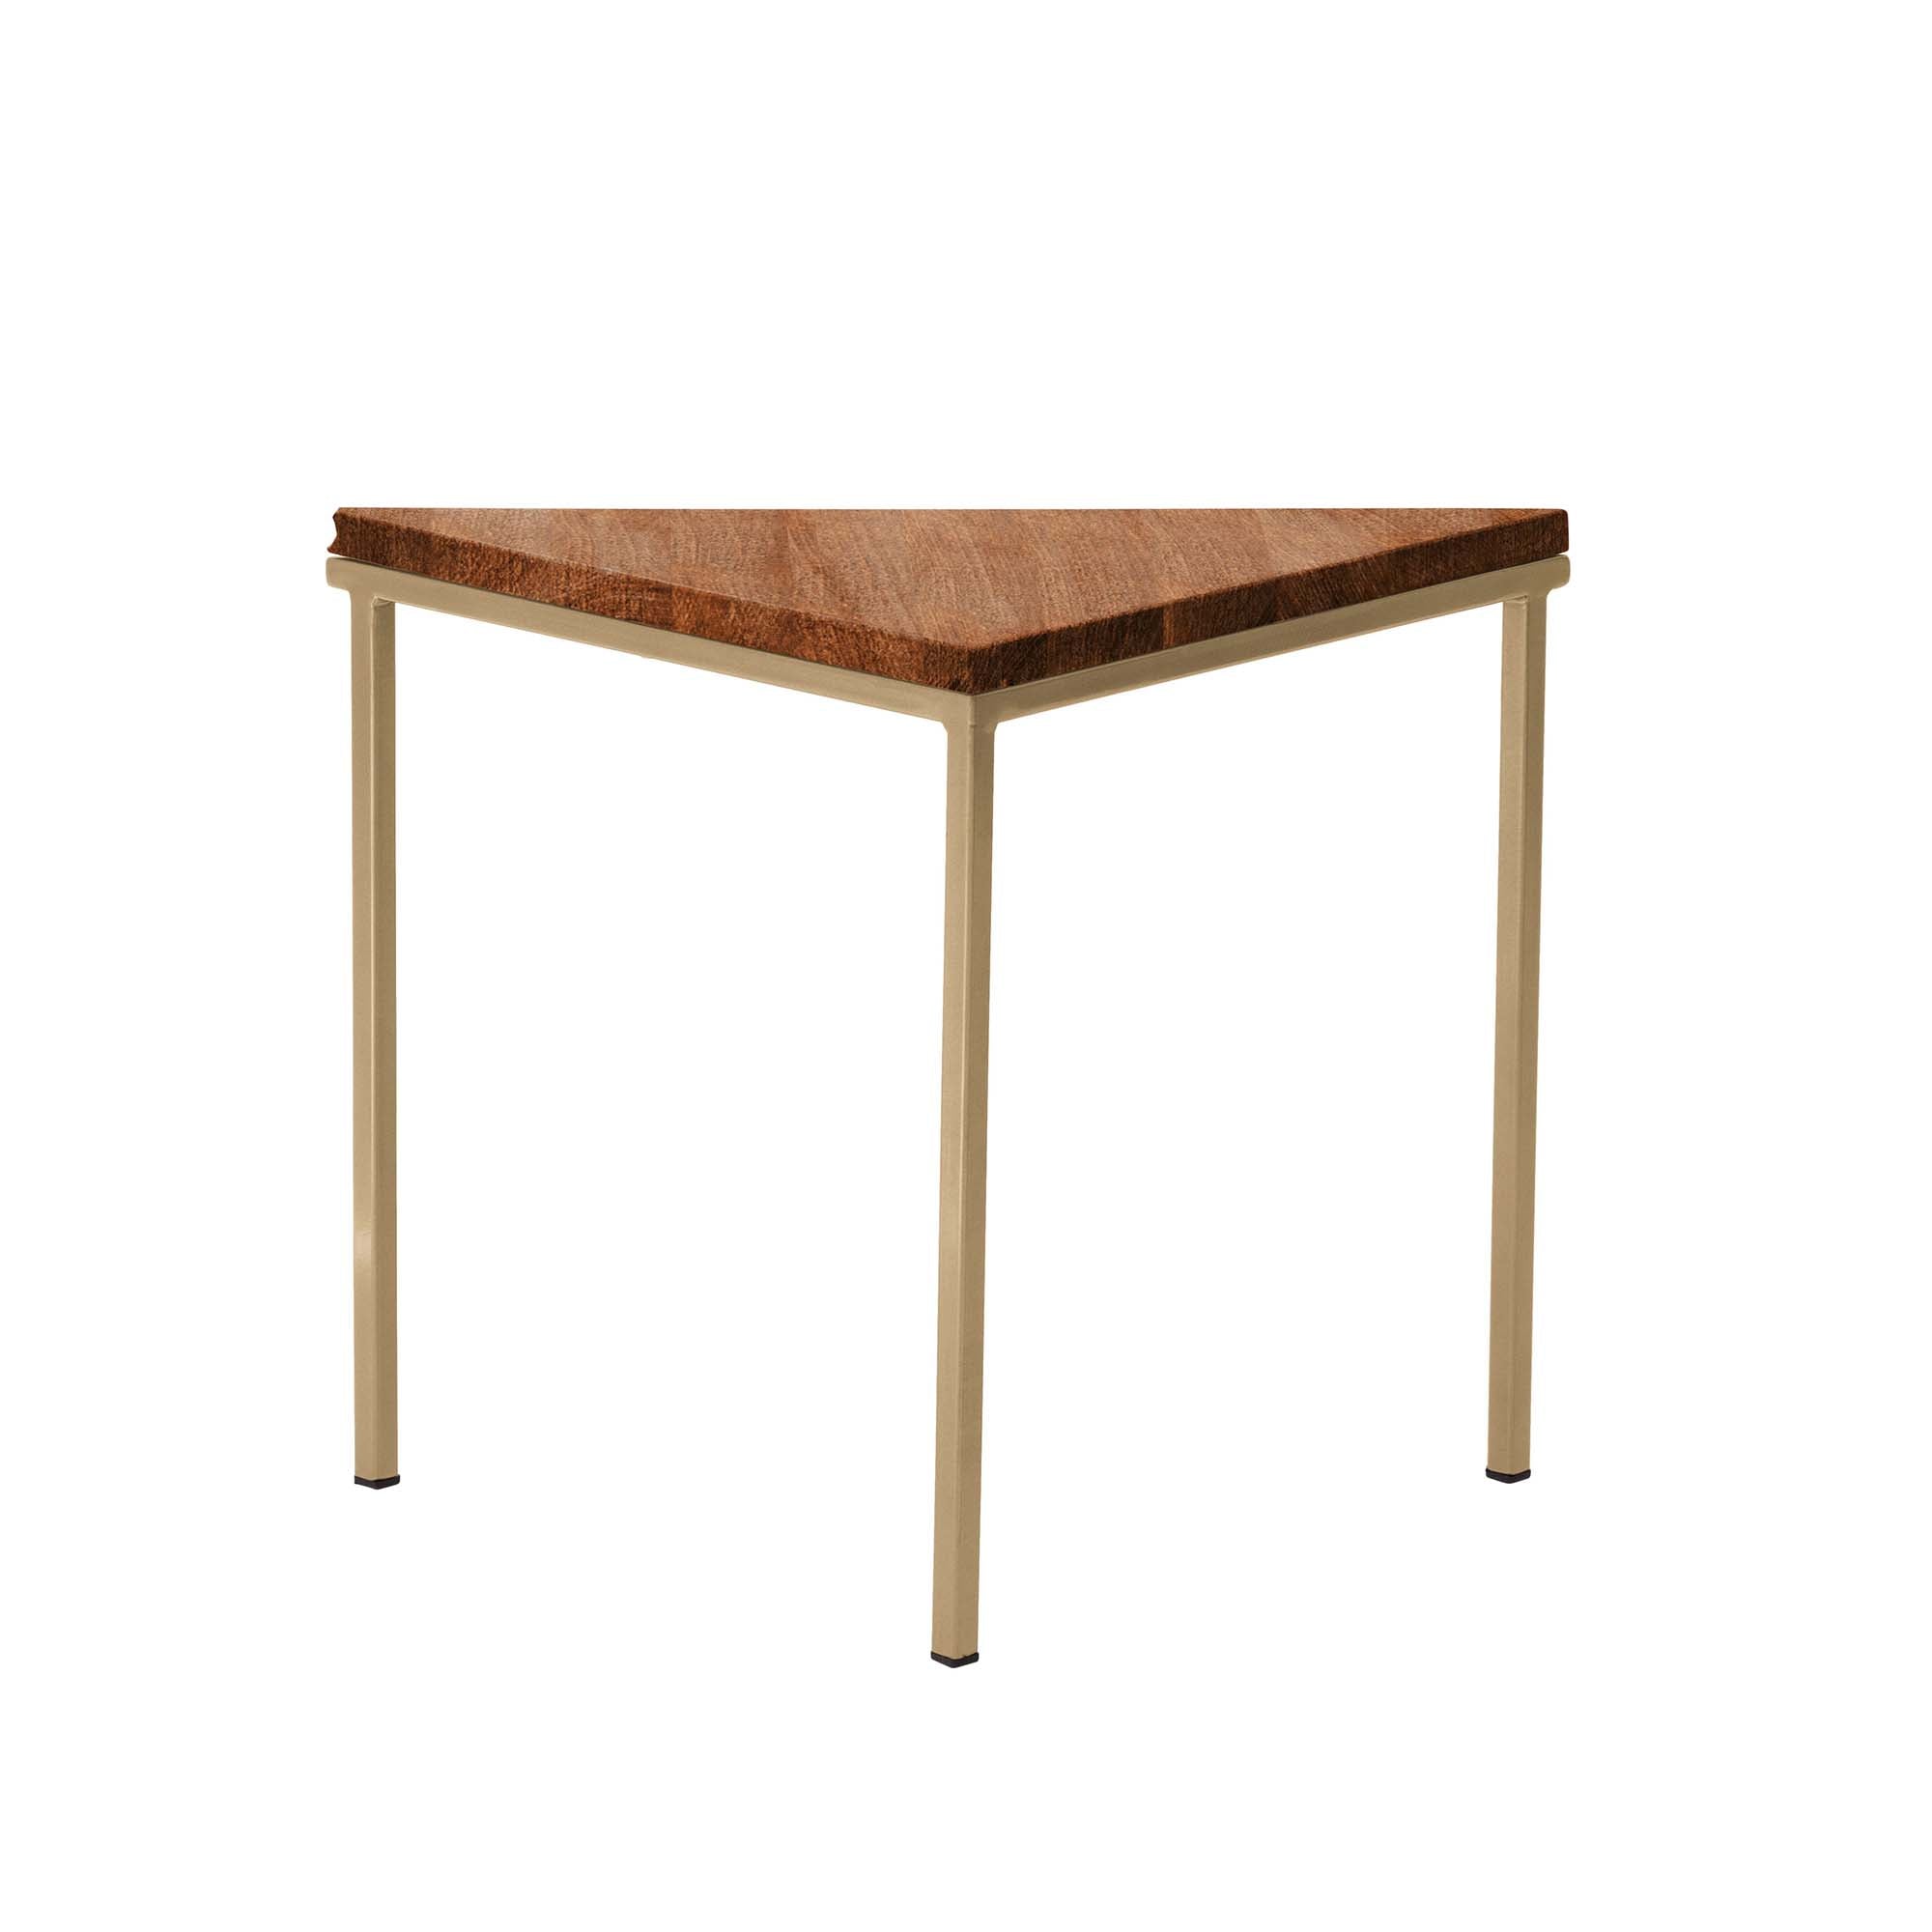 Tripod Table, Beech Wood, Walnut Colour, yellow frame, side view